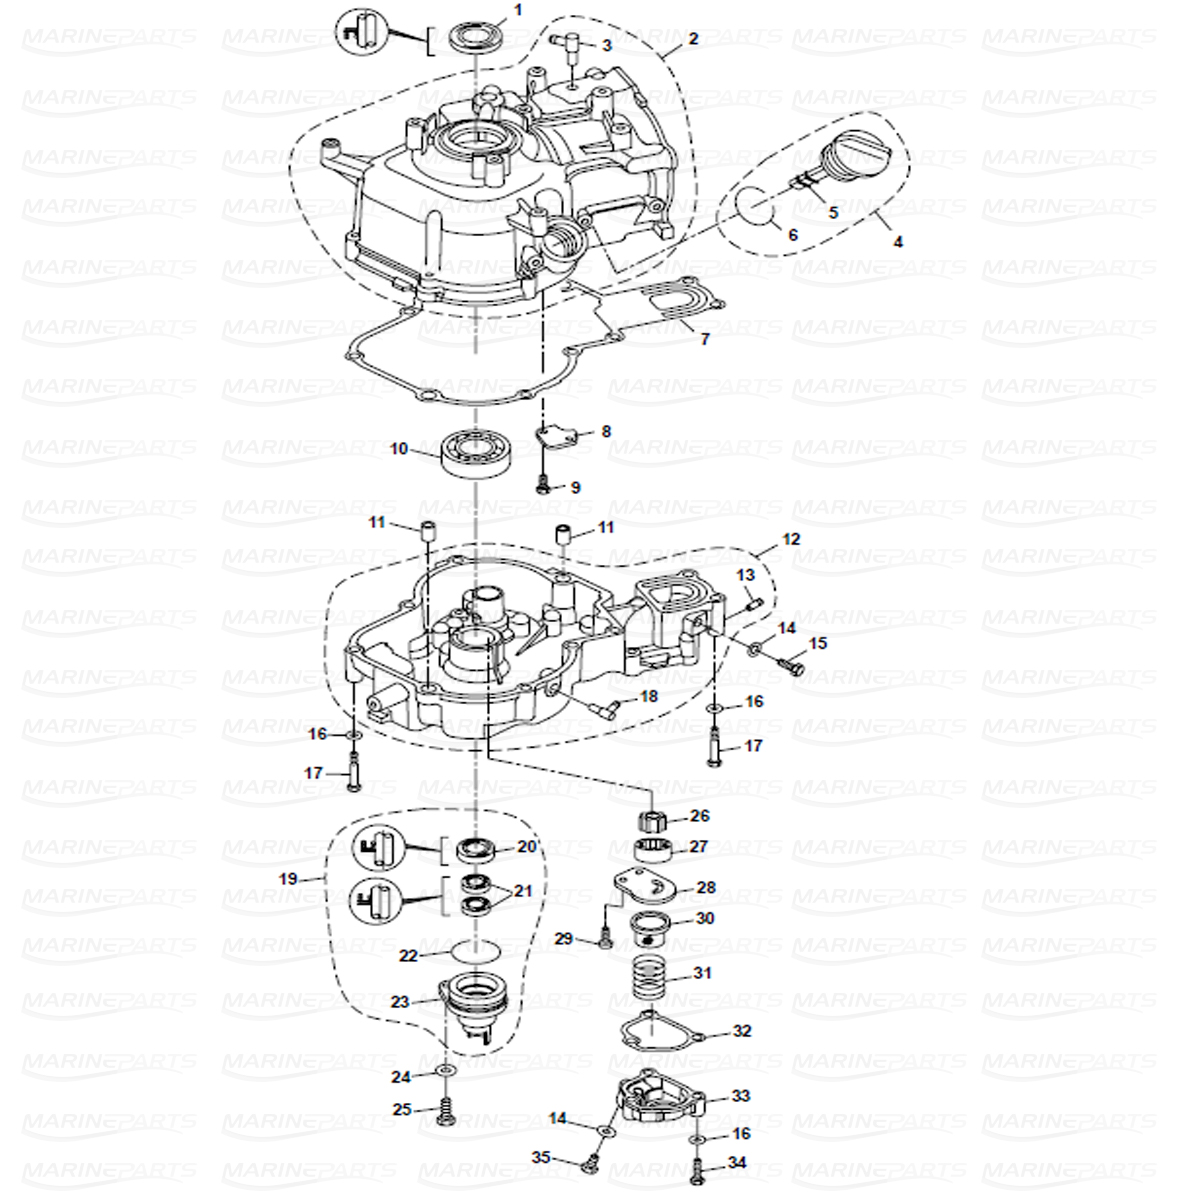 Exploded view crankcase, Parsun 6 hp